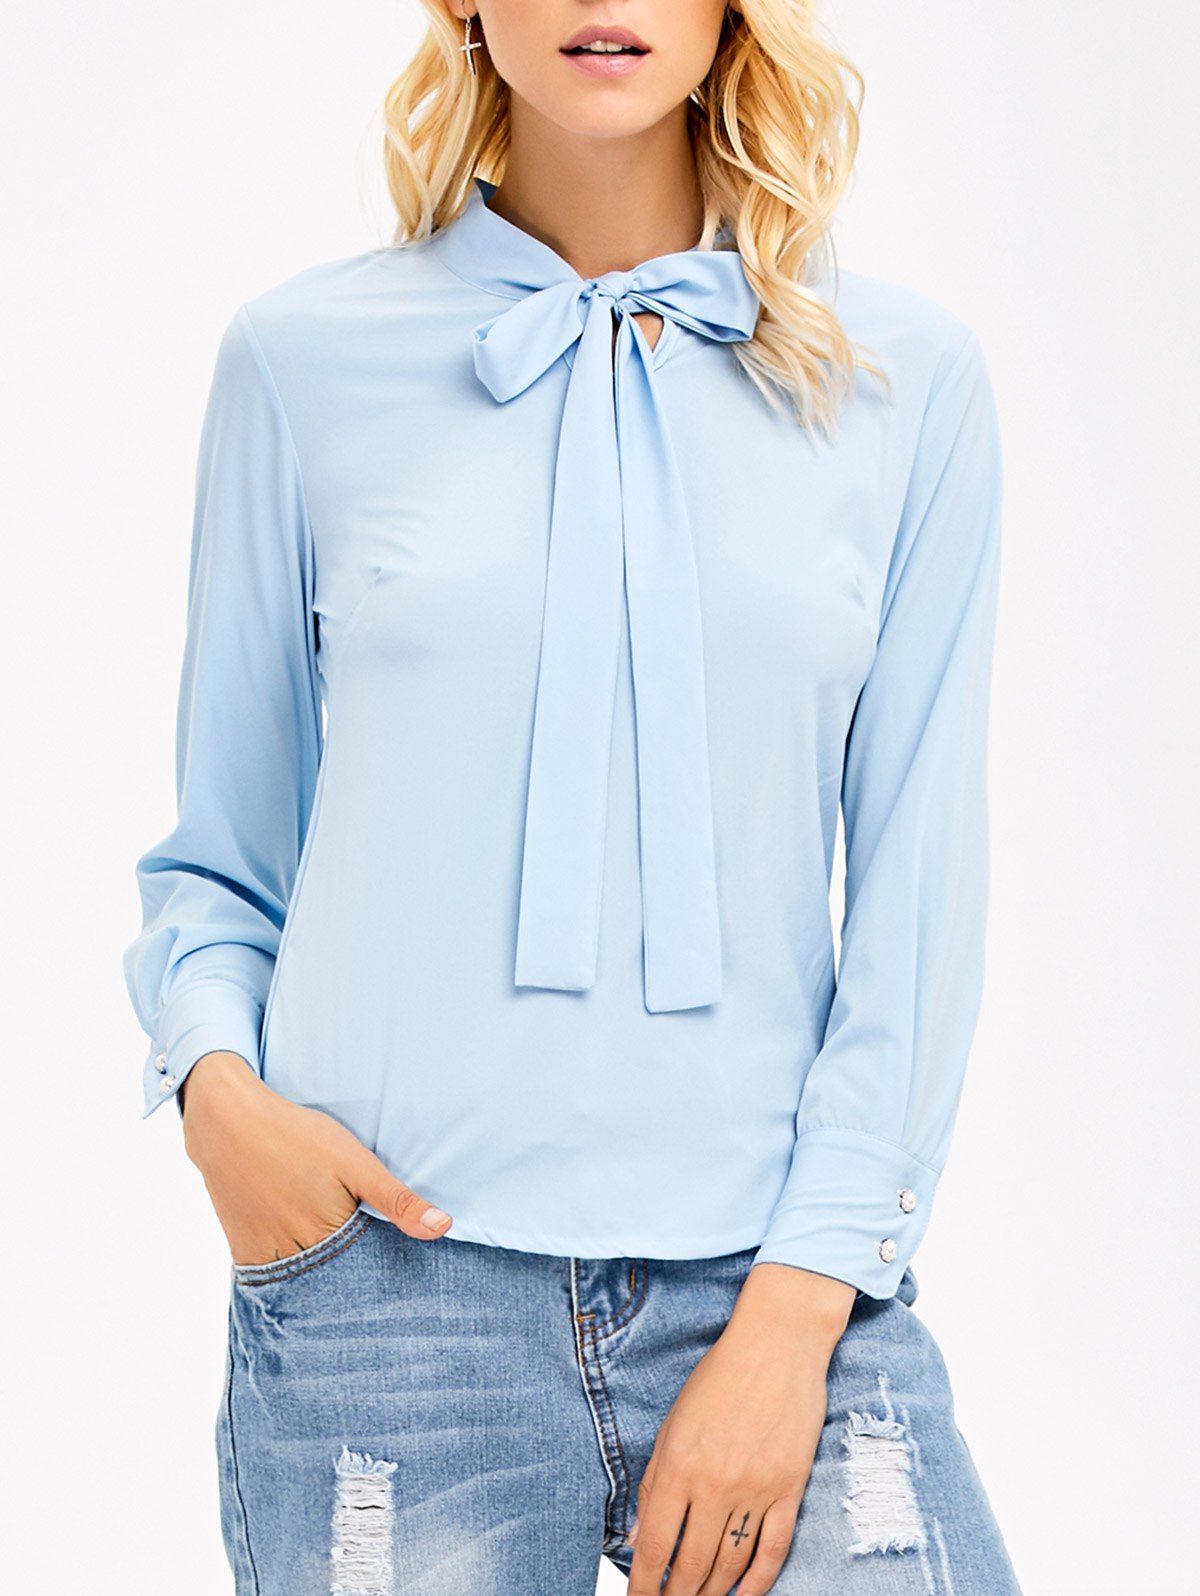 Pussy Bow Tie Long Sleeves Blouse - LIGHT BLUE L